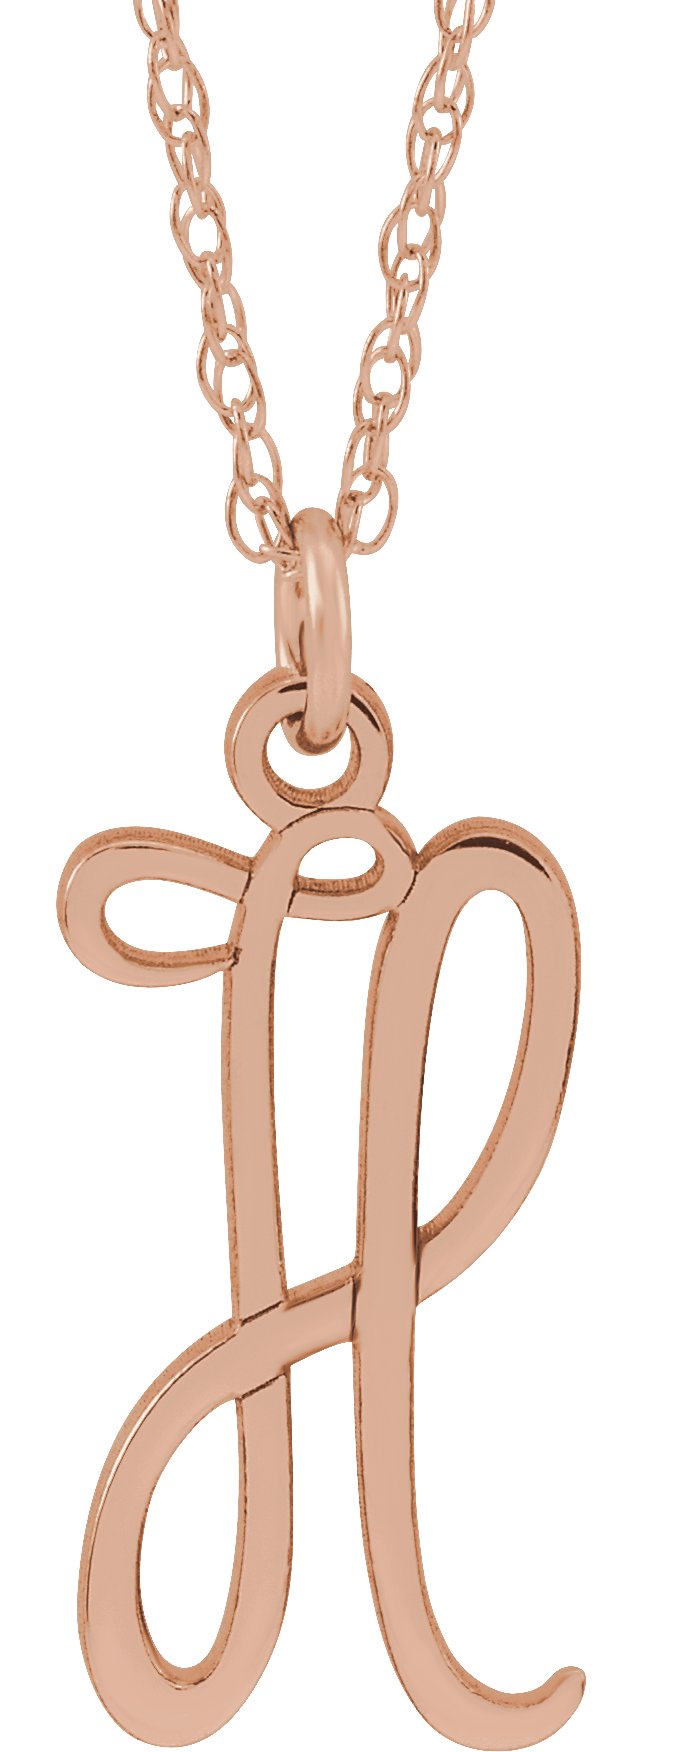 14K Rose Gold-Plated Sterling Silver Script Initial H 16-18" Necklace